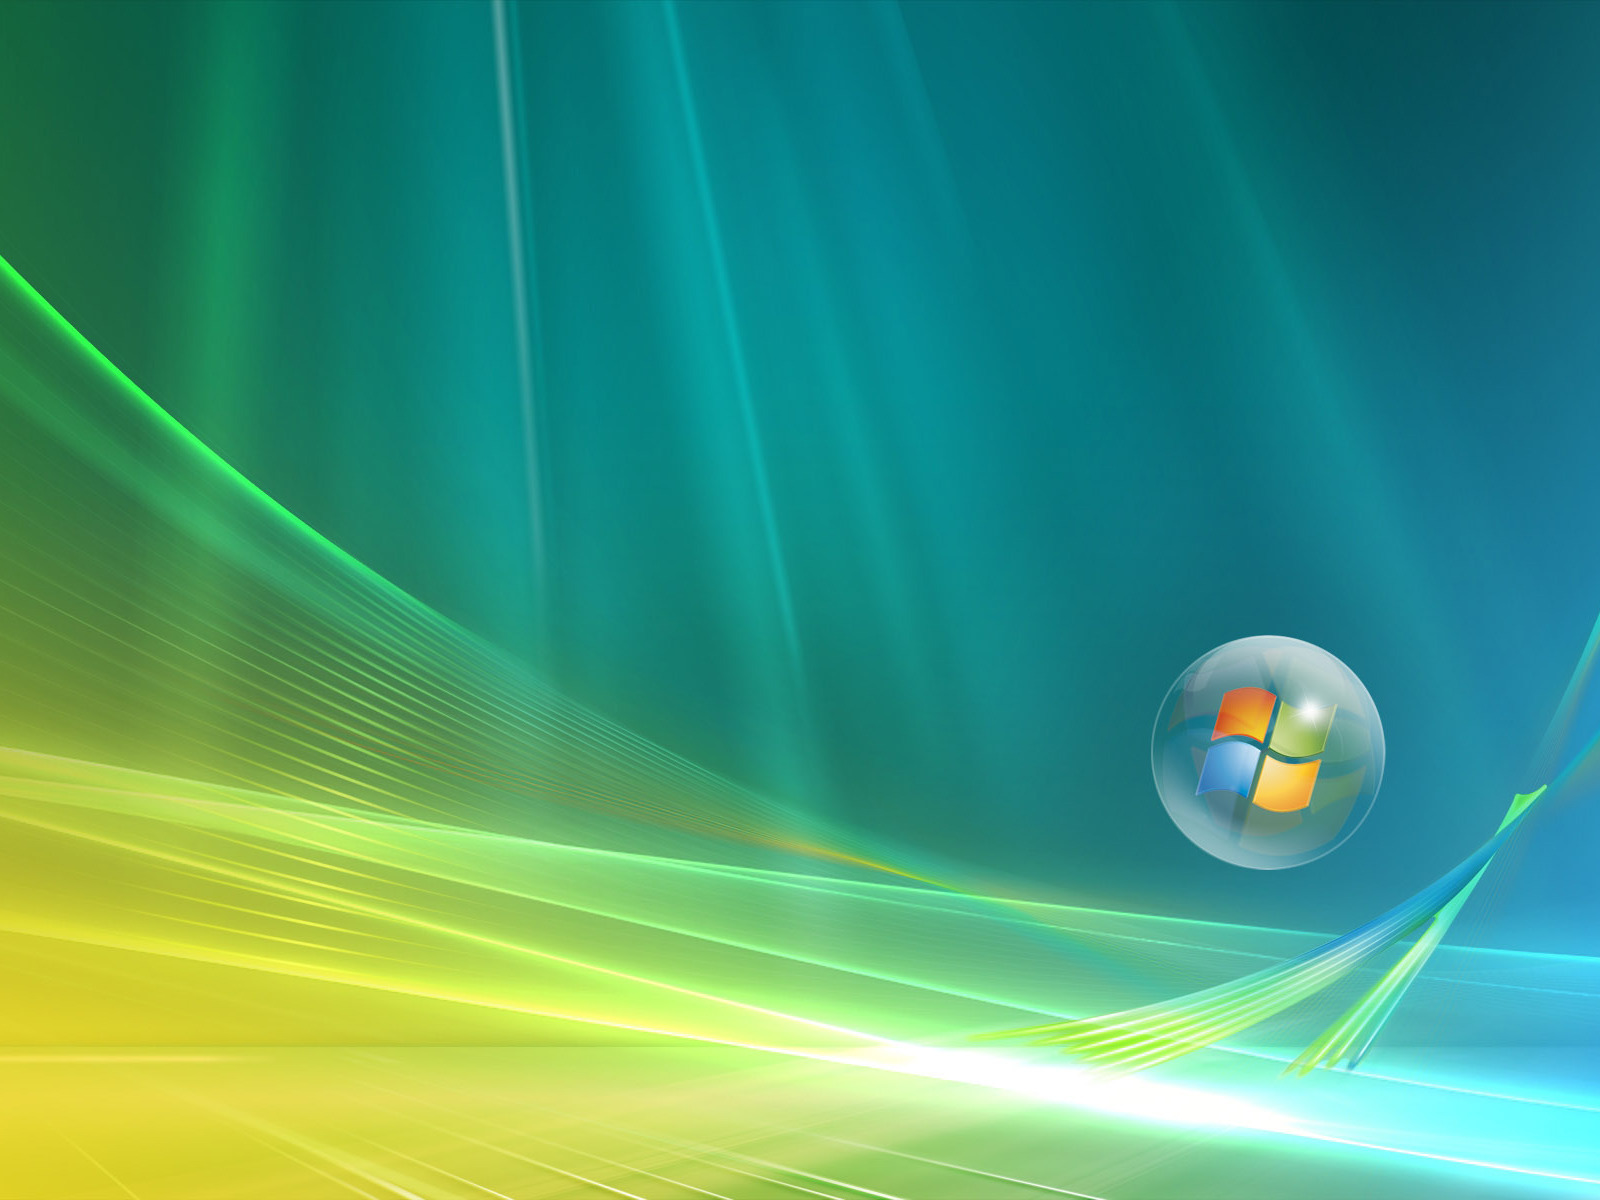 windows, background, logos, brands, turquoise Full HD